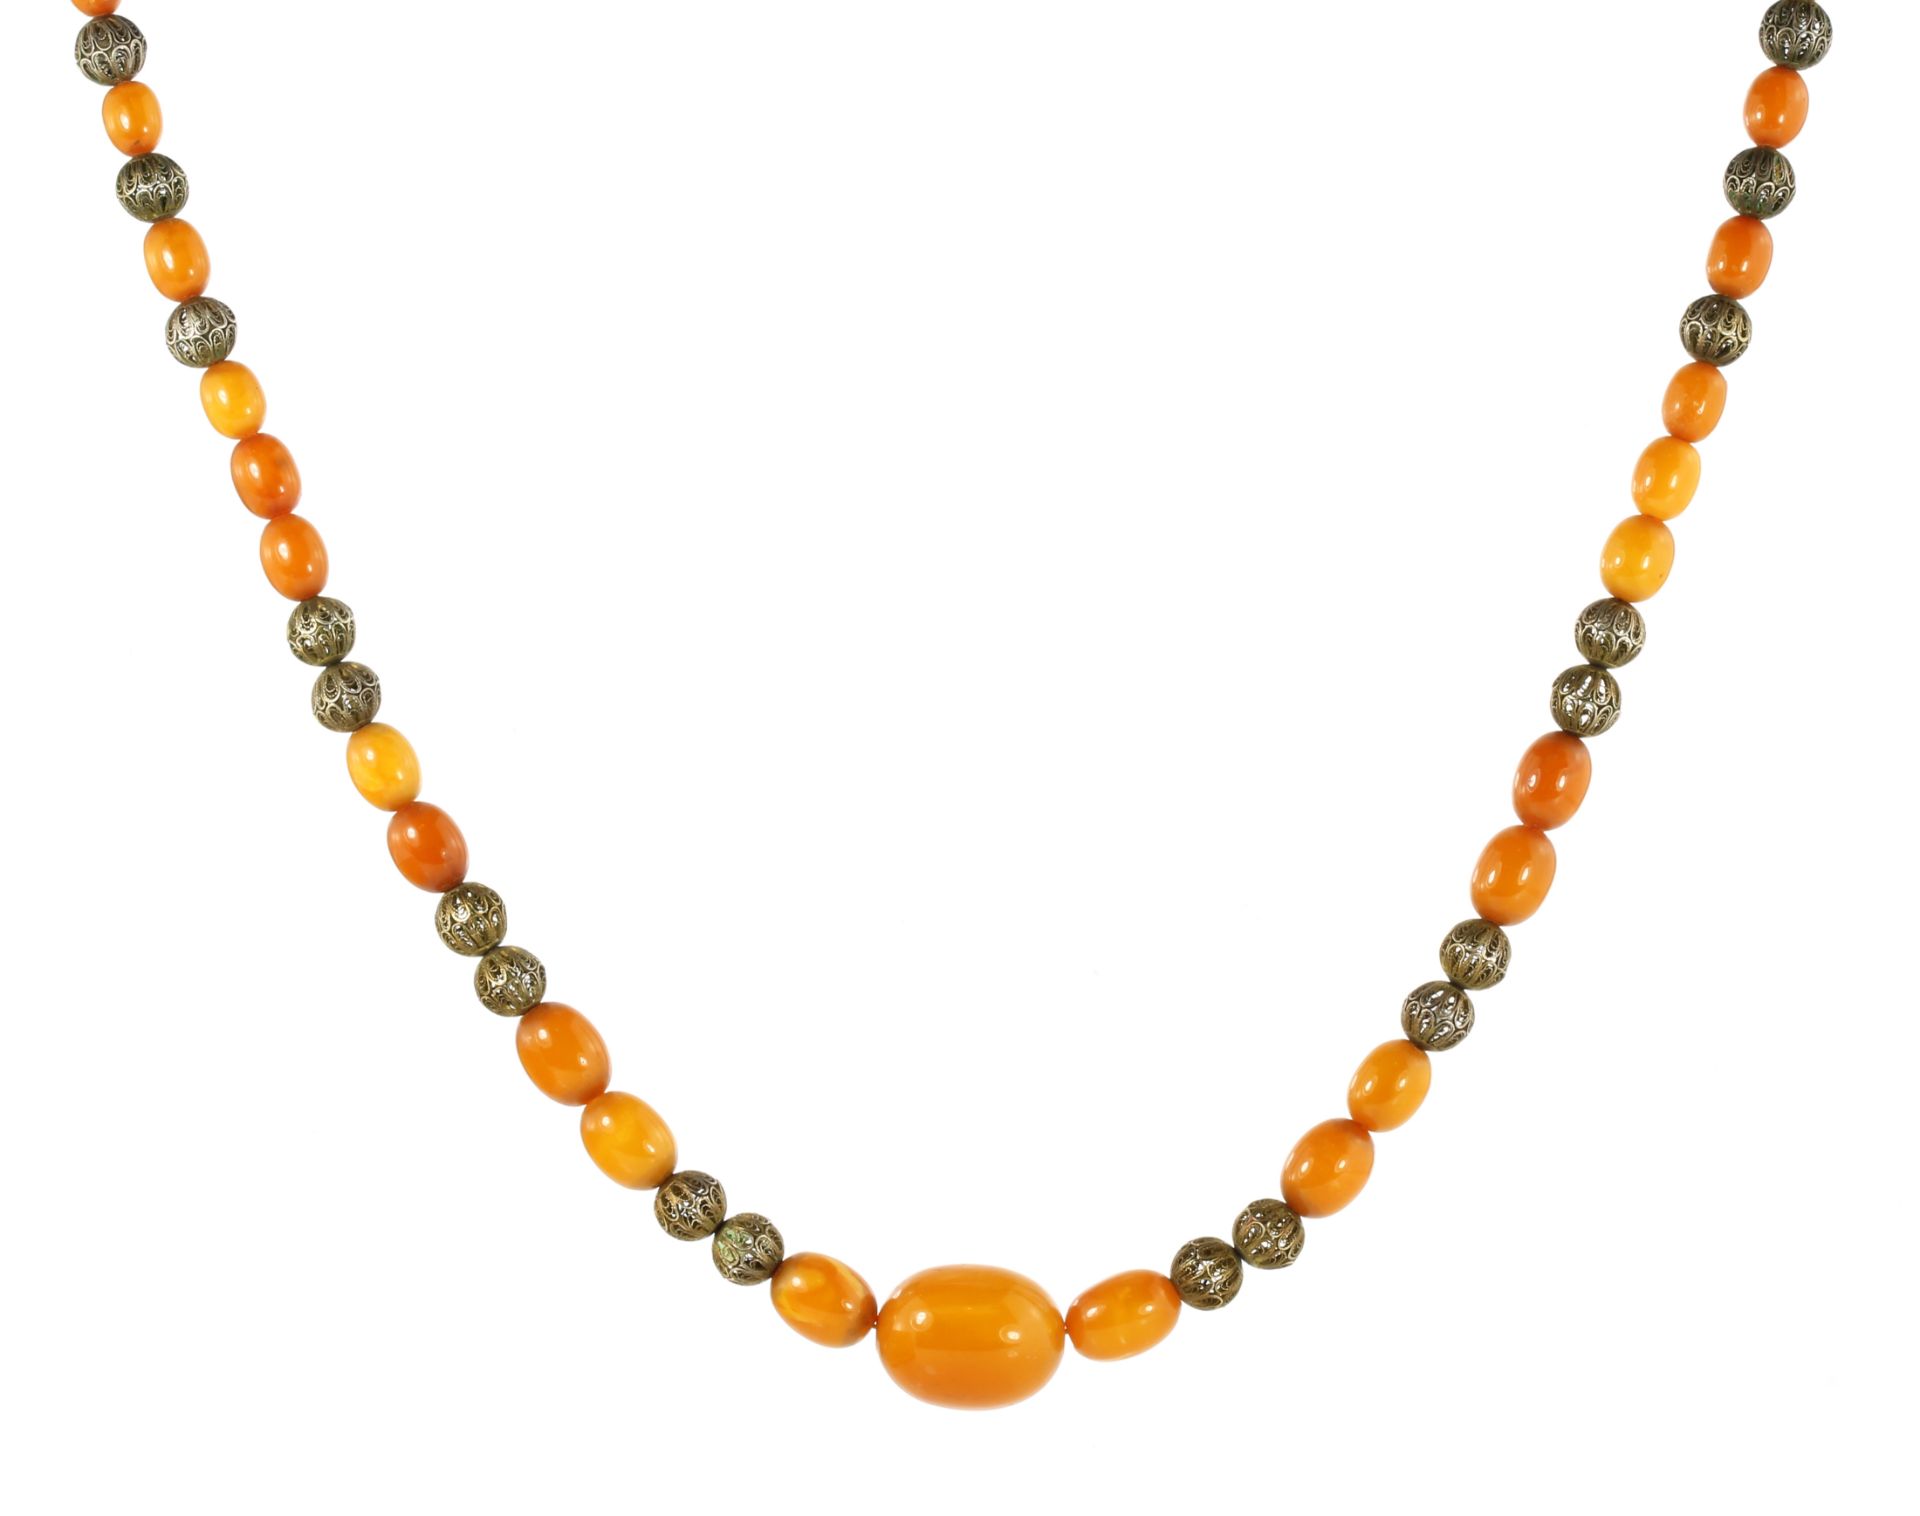 AN ANTIQUE NATURAL AMBER BEAD NECKLACE comprising a single row of forty-one graduated polished